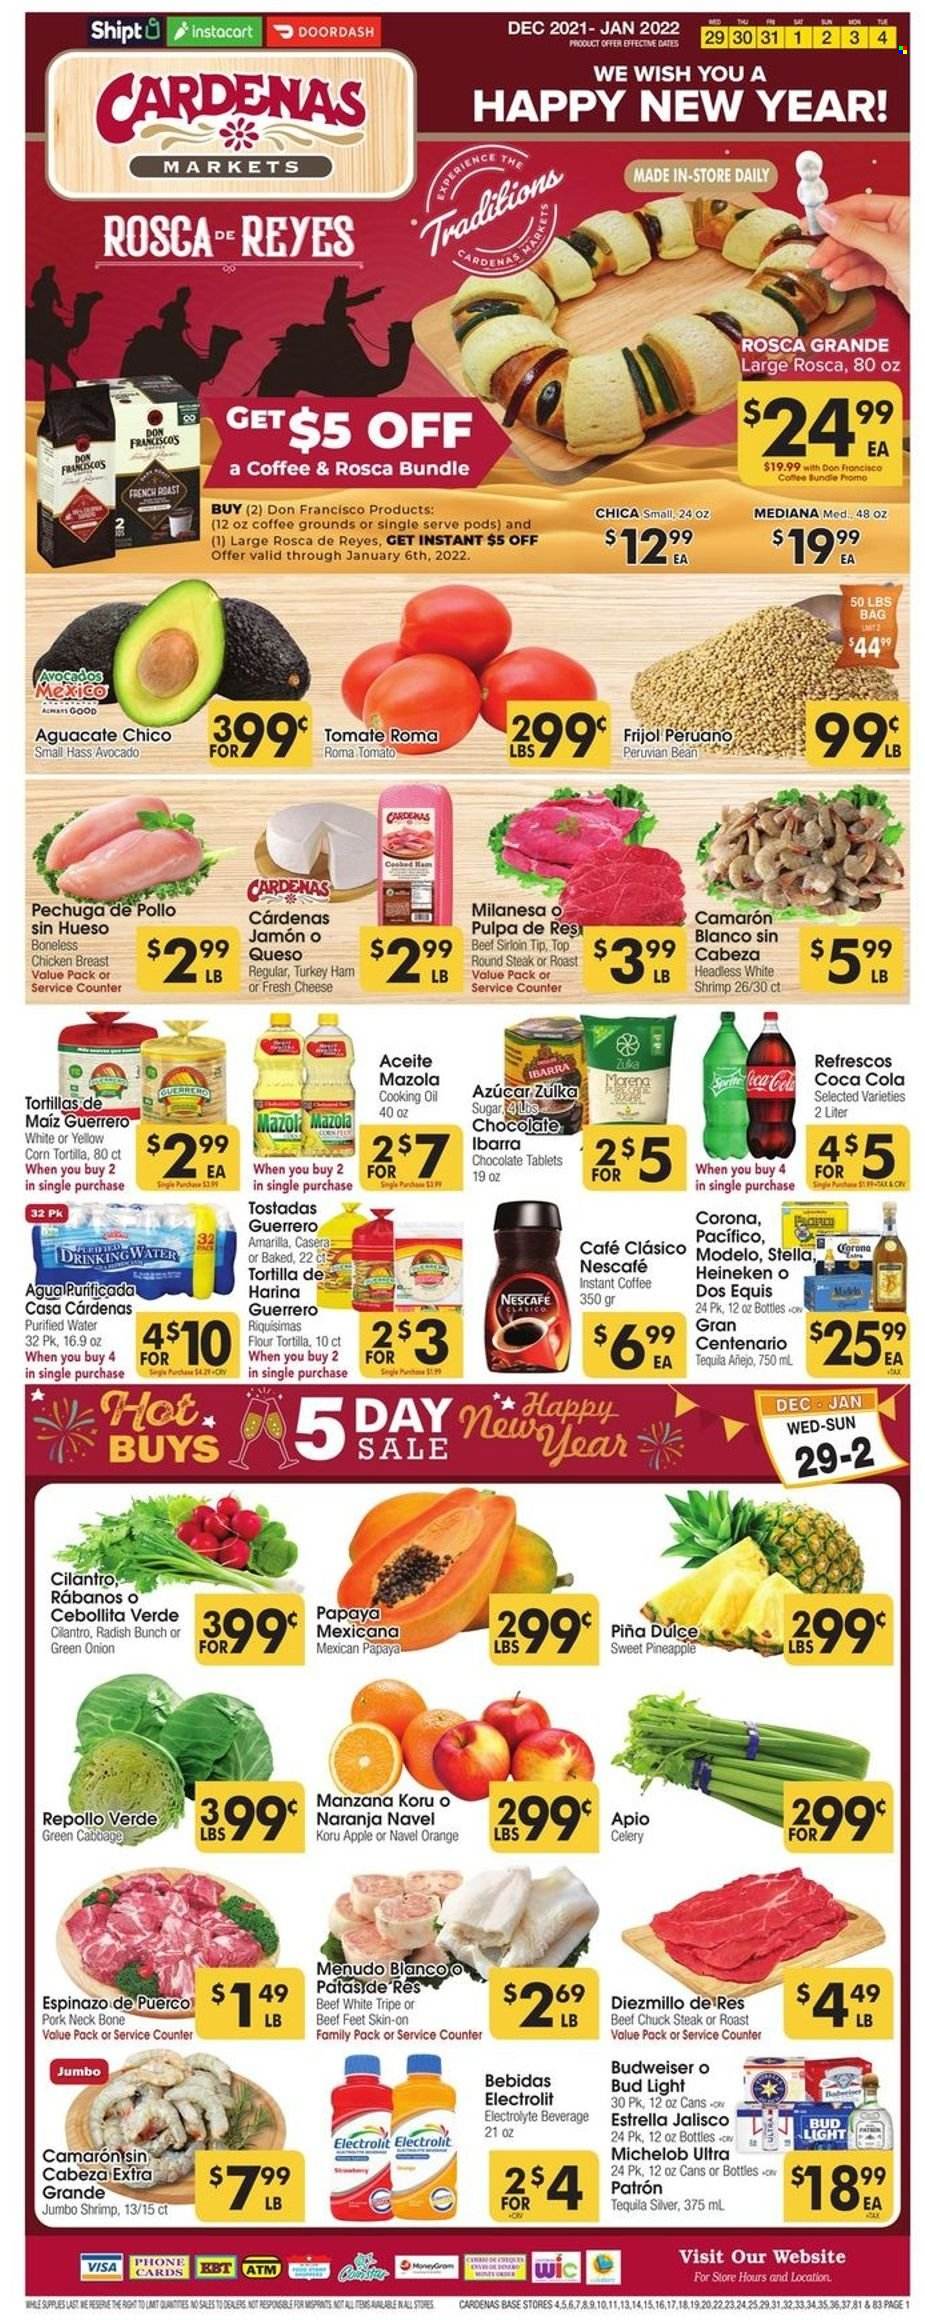 thumbnail - Cardenas Flyer - 12/29/2021 - 01/04/2022 - Sales products - tortillas, tostadas, cabbage, celery, radishes, tomatoes, onion, green onion, avocado, pineapple, papaya, oranges, shrimps, ham, cheese, chocolate, sugar, cilantro, oil, Coca-Cola, purified water, instant coffee, Nescafé, tequila, beer, Bud Light, Corona Extra, Heineken, Modelo, chicken breasts, beef meat, beef sirloin, steak, round steak, chuck steak, Budweiser, Dos Equis, Michelob, navel oranges. Page 1.